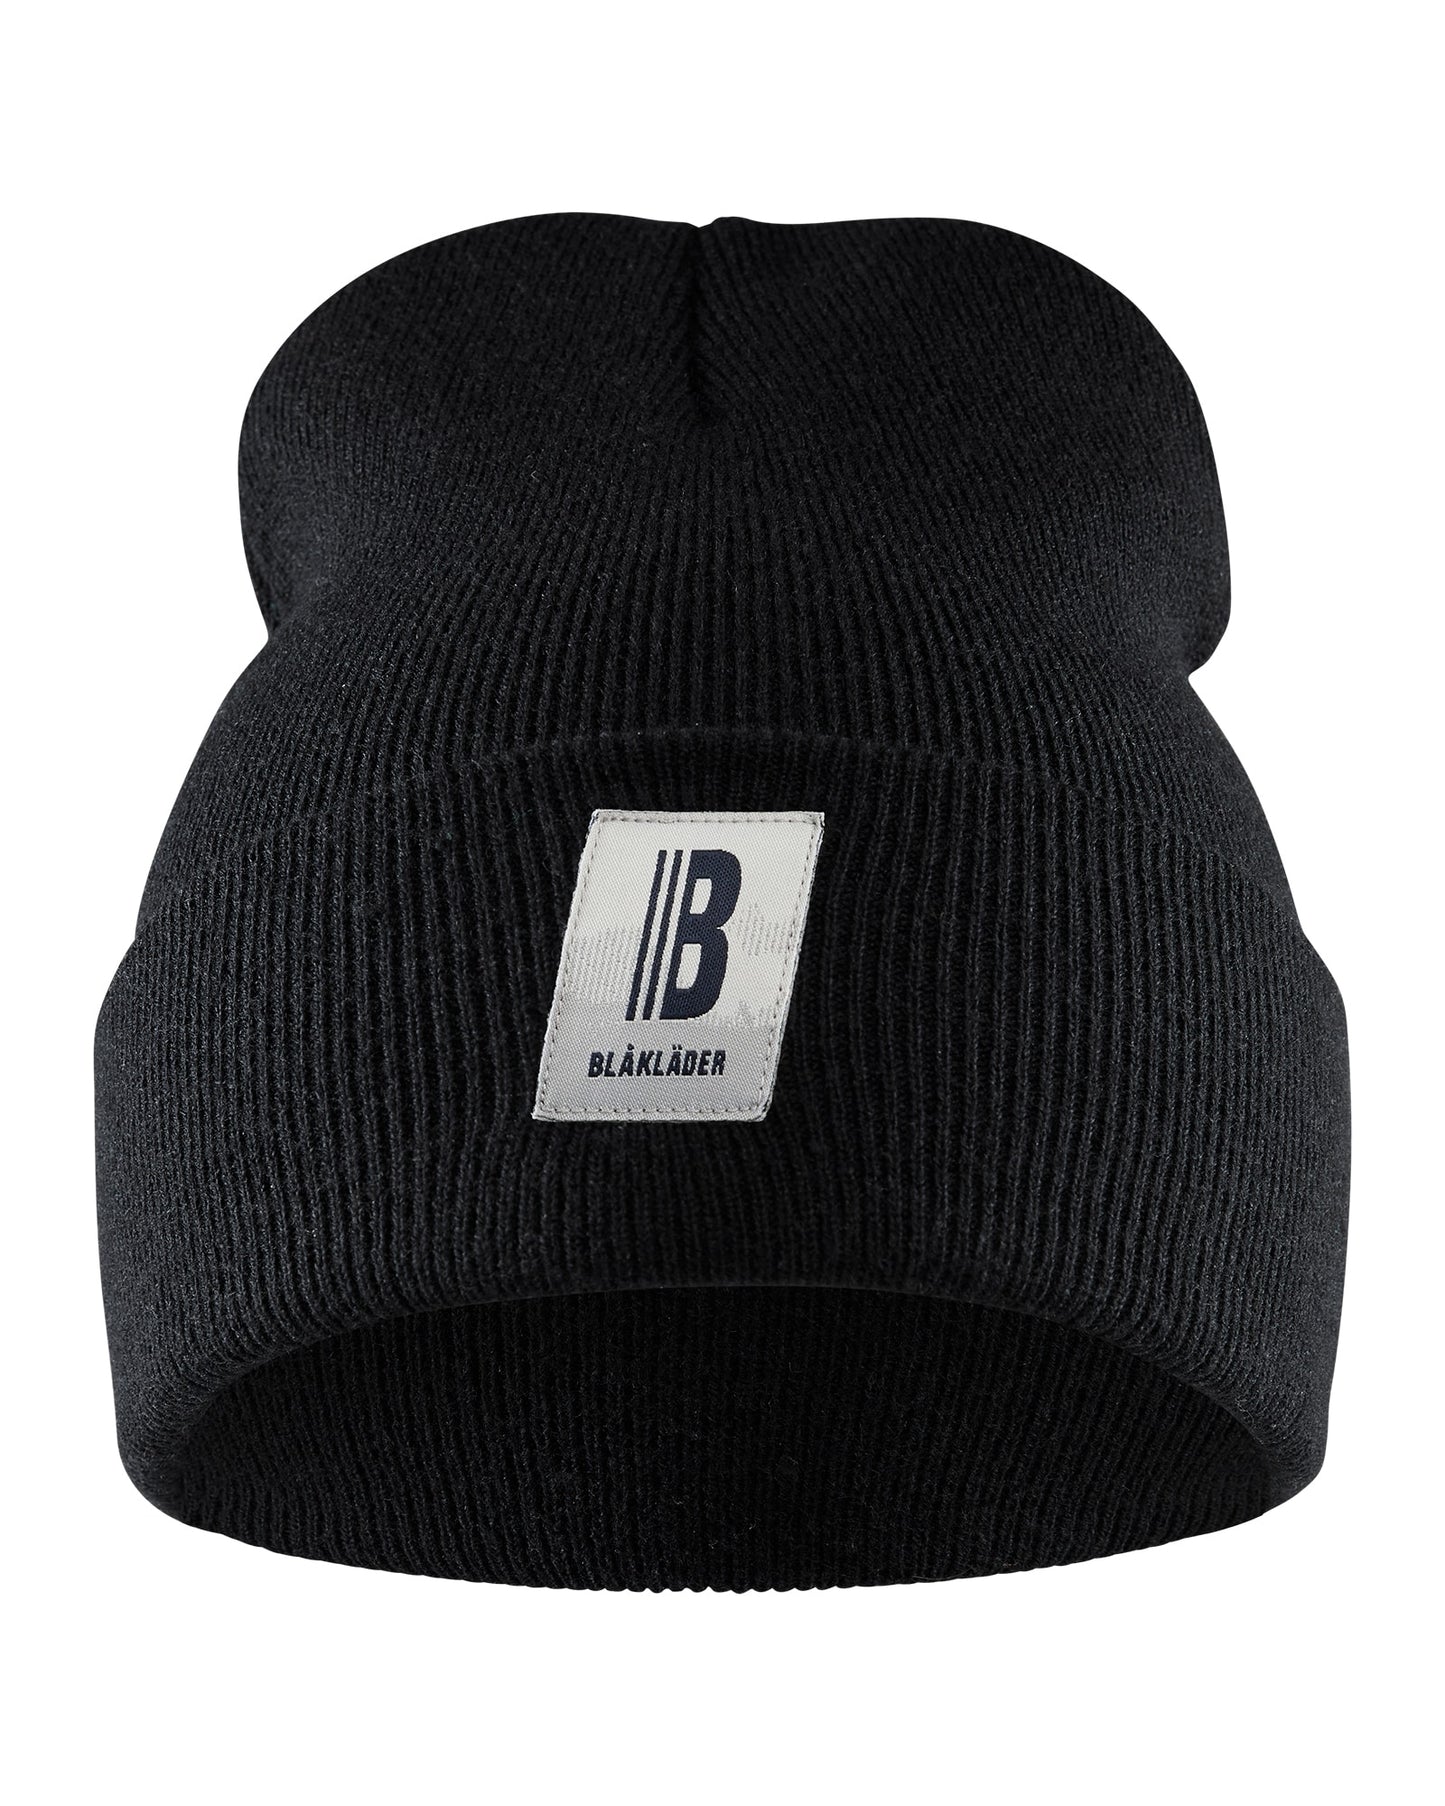 FREE LIMITED EDITION BEANIE WHEN BOUGHT WITH 5930 Blaklader HYBRID JACKET